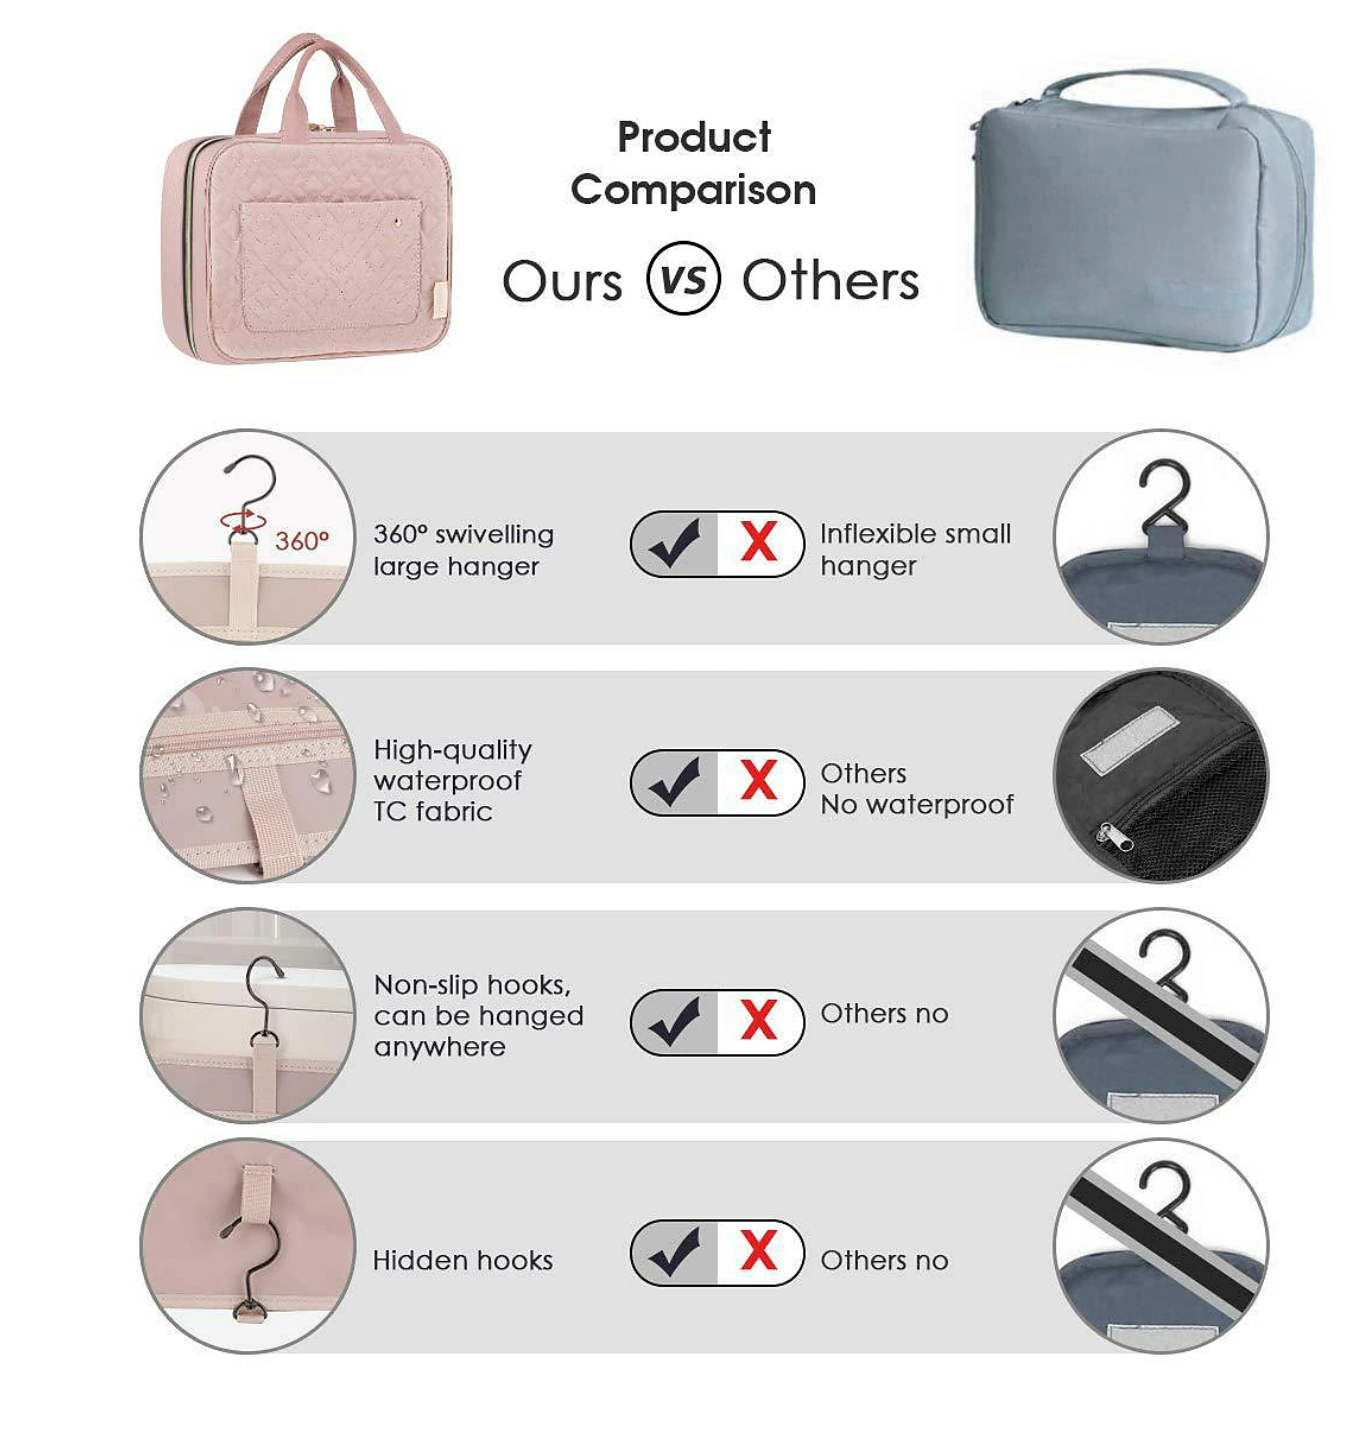 Toiletry Bag Travel Bag with Hanging Hook, Water-resistant Makeup Cosmetic Bag Travel Organizer for Accessories, Shampoo, Full Sized Container, Toiletries